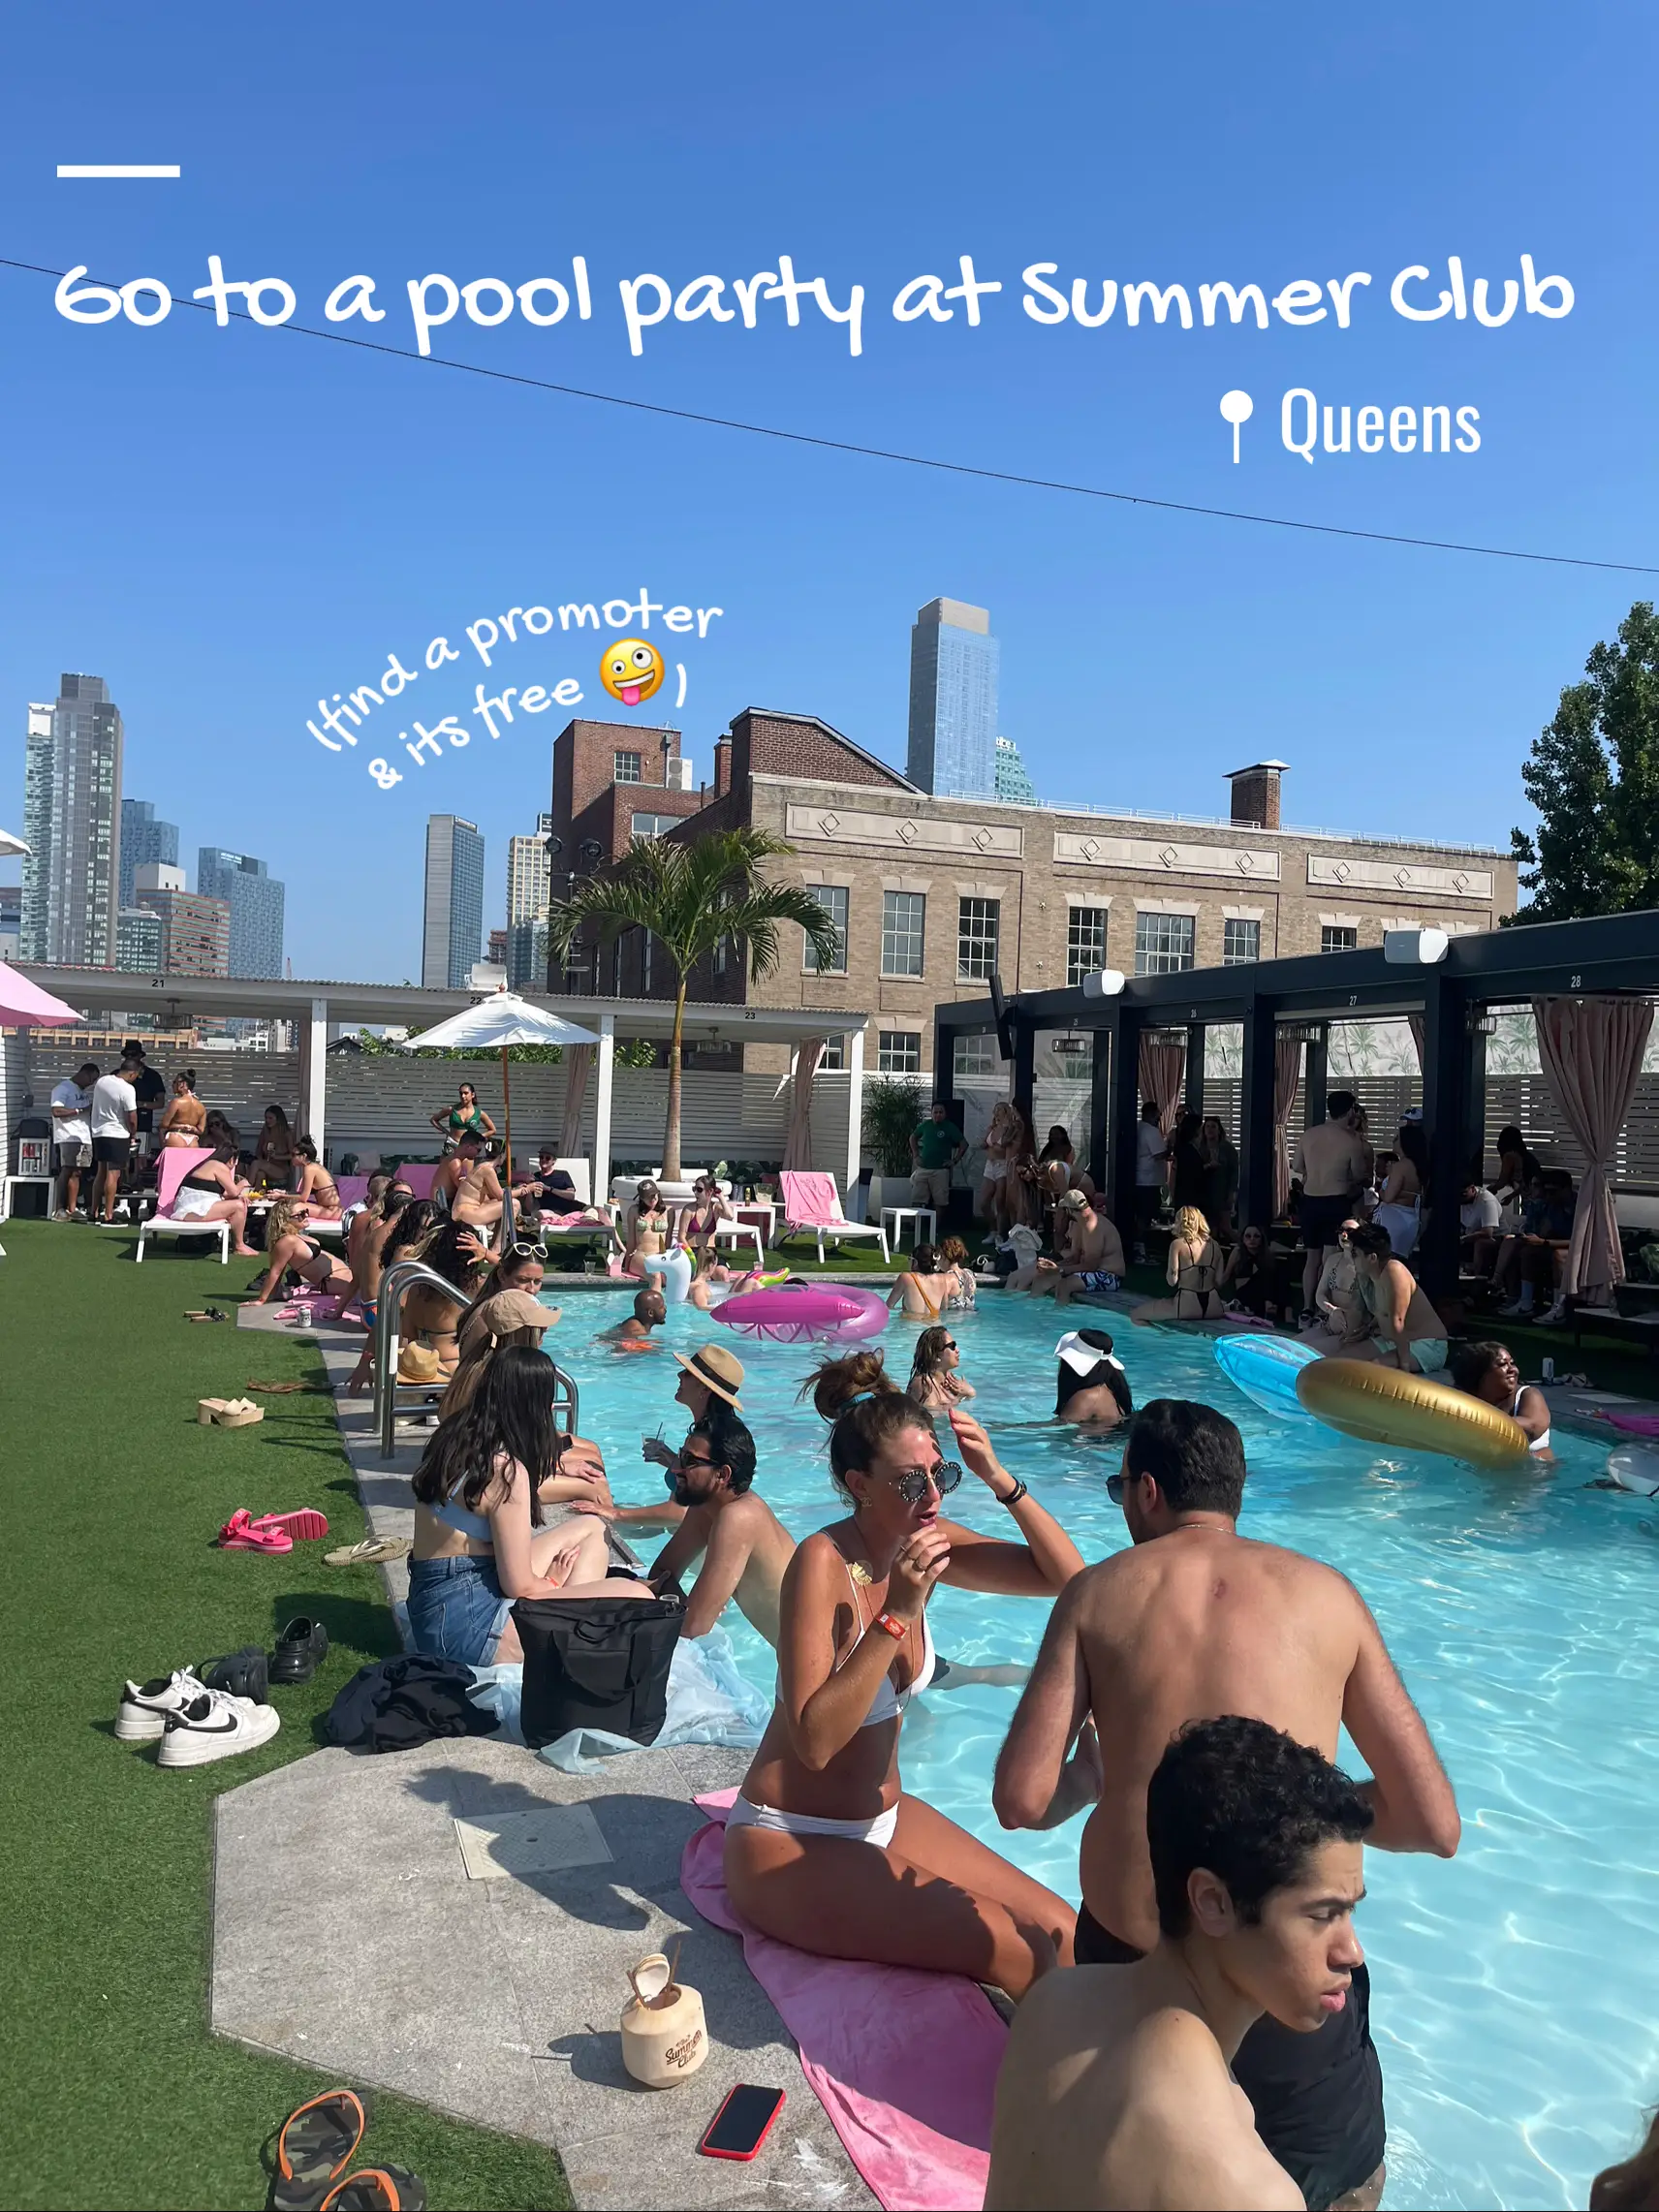  A group of people are sitting in a pool at a summer club.